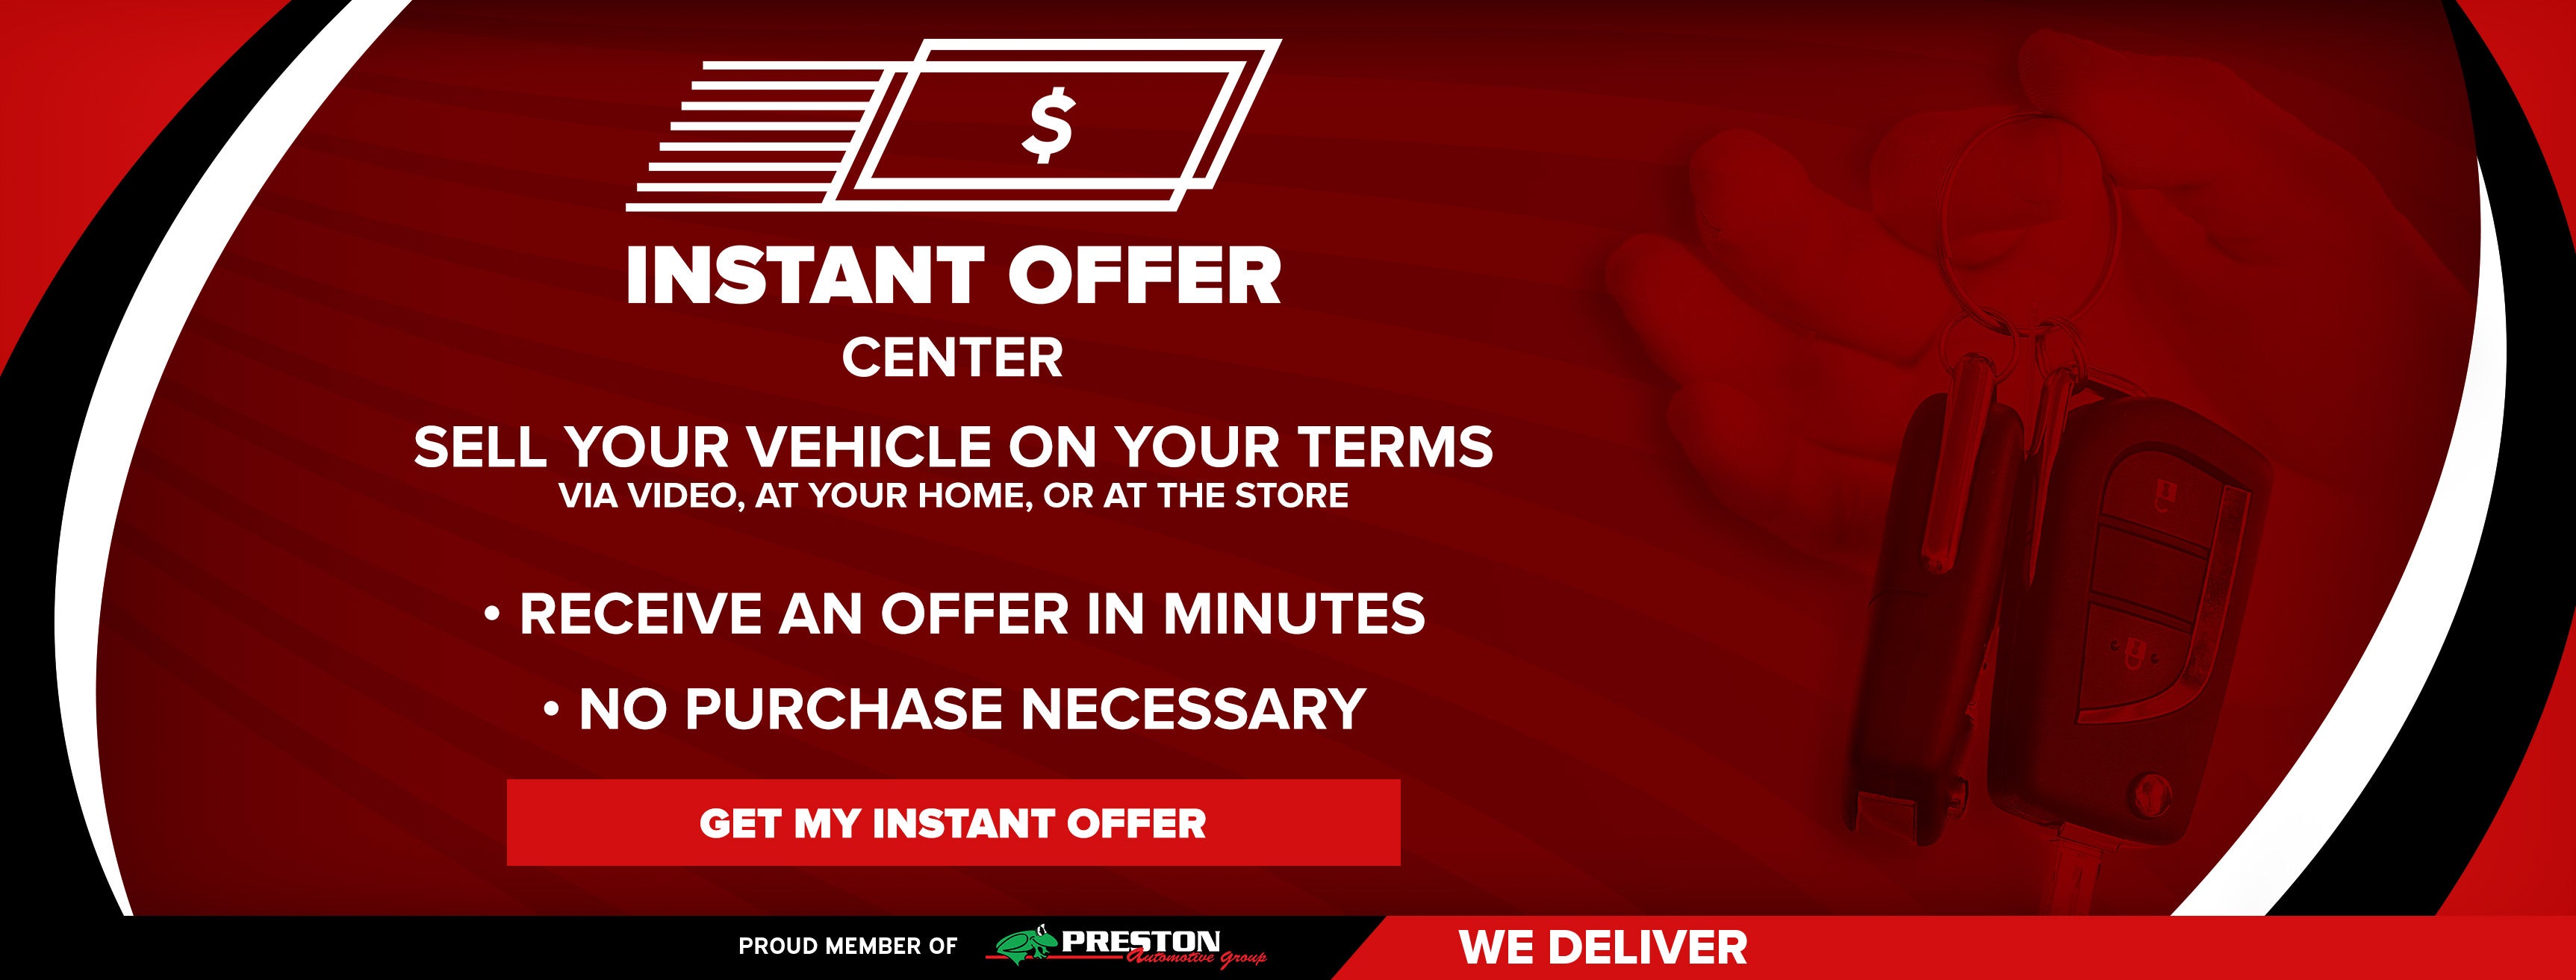 GET MY INSTANT OFFER